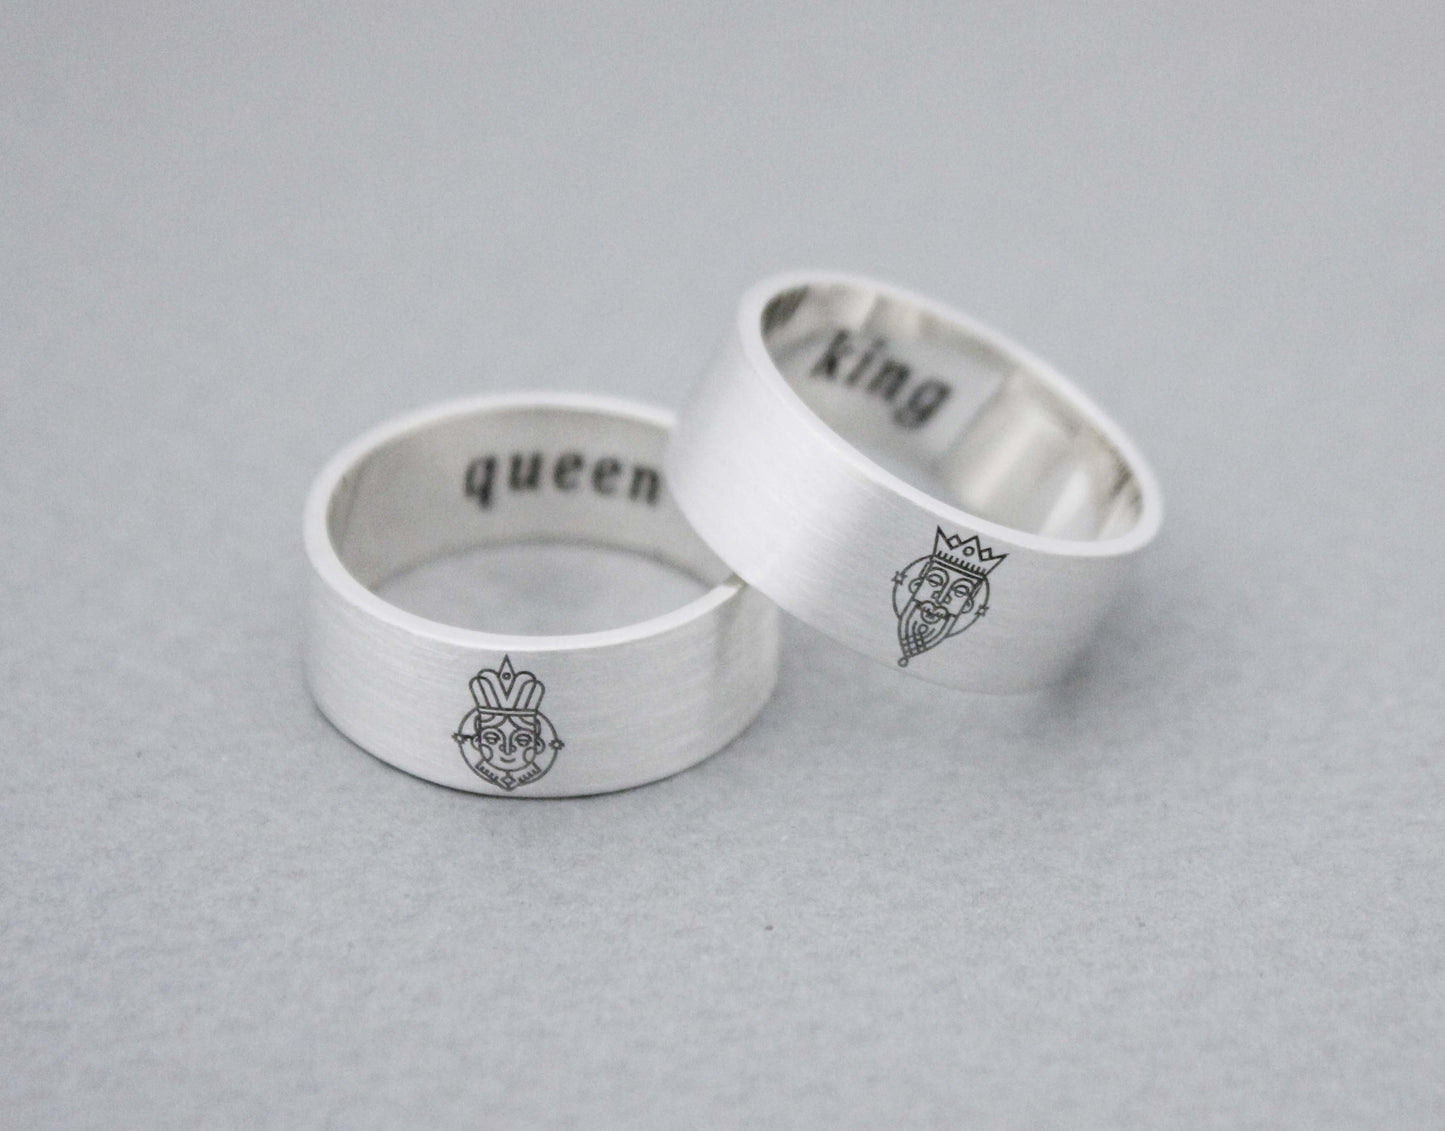 925 sterling silver Queen and King Ring ,Couple Rings,Custom Personalized Initial Ring